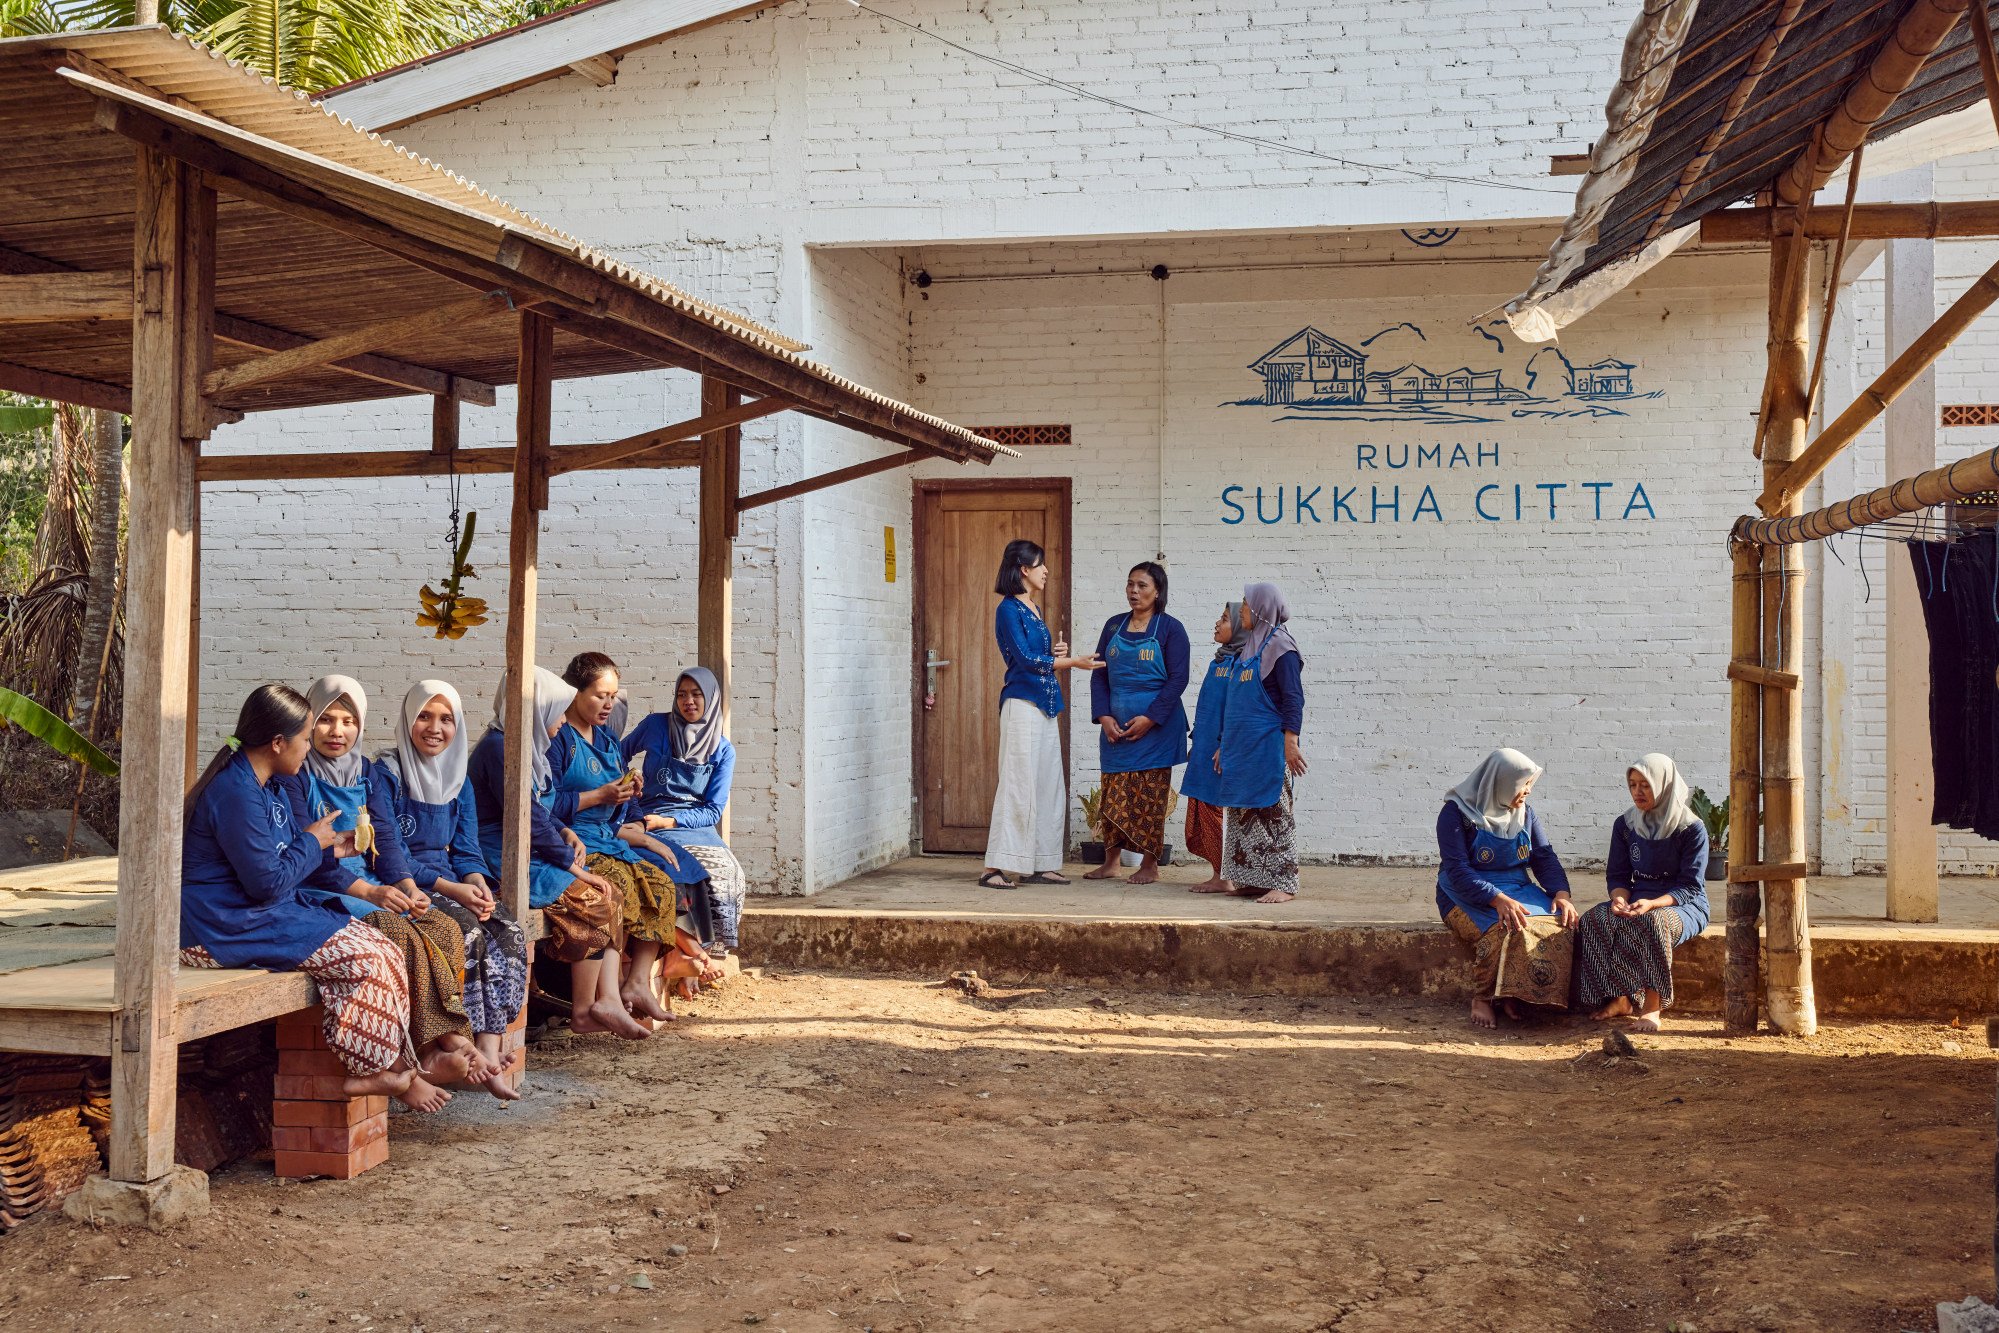 meet indonesia’s rolex awards for enterprise laureate: how denica riadini-flesch, ex-world bank economist and founder of the sukkhacitta sustainable clothing label, is ensuring a better deal for women